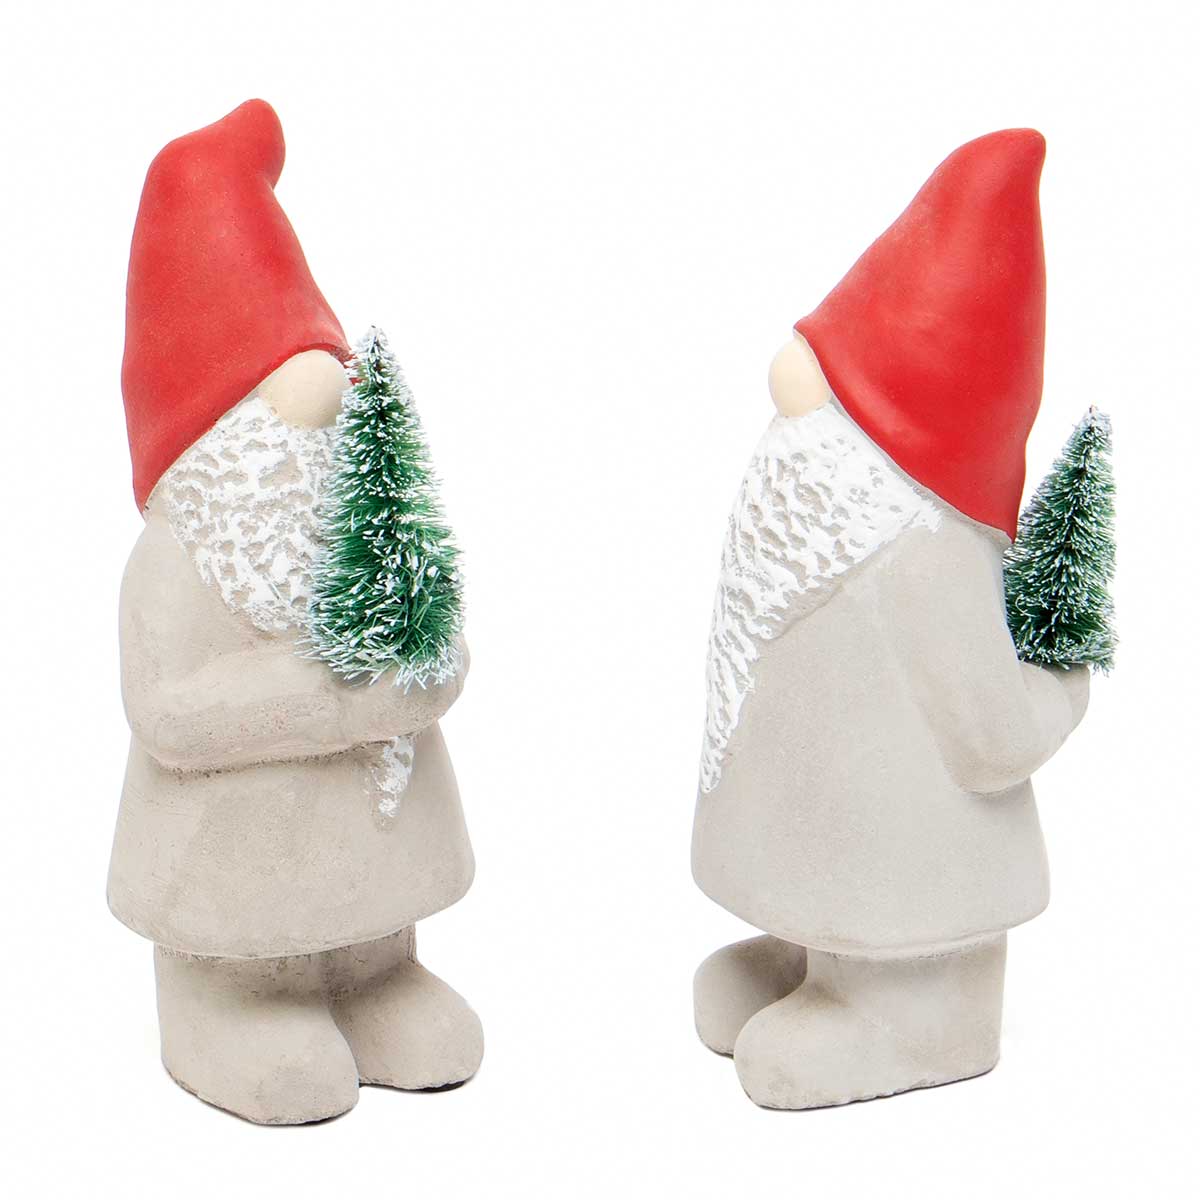 !CONCRETE GNOME RED HAT 2 ASSORTED 7"